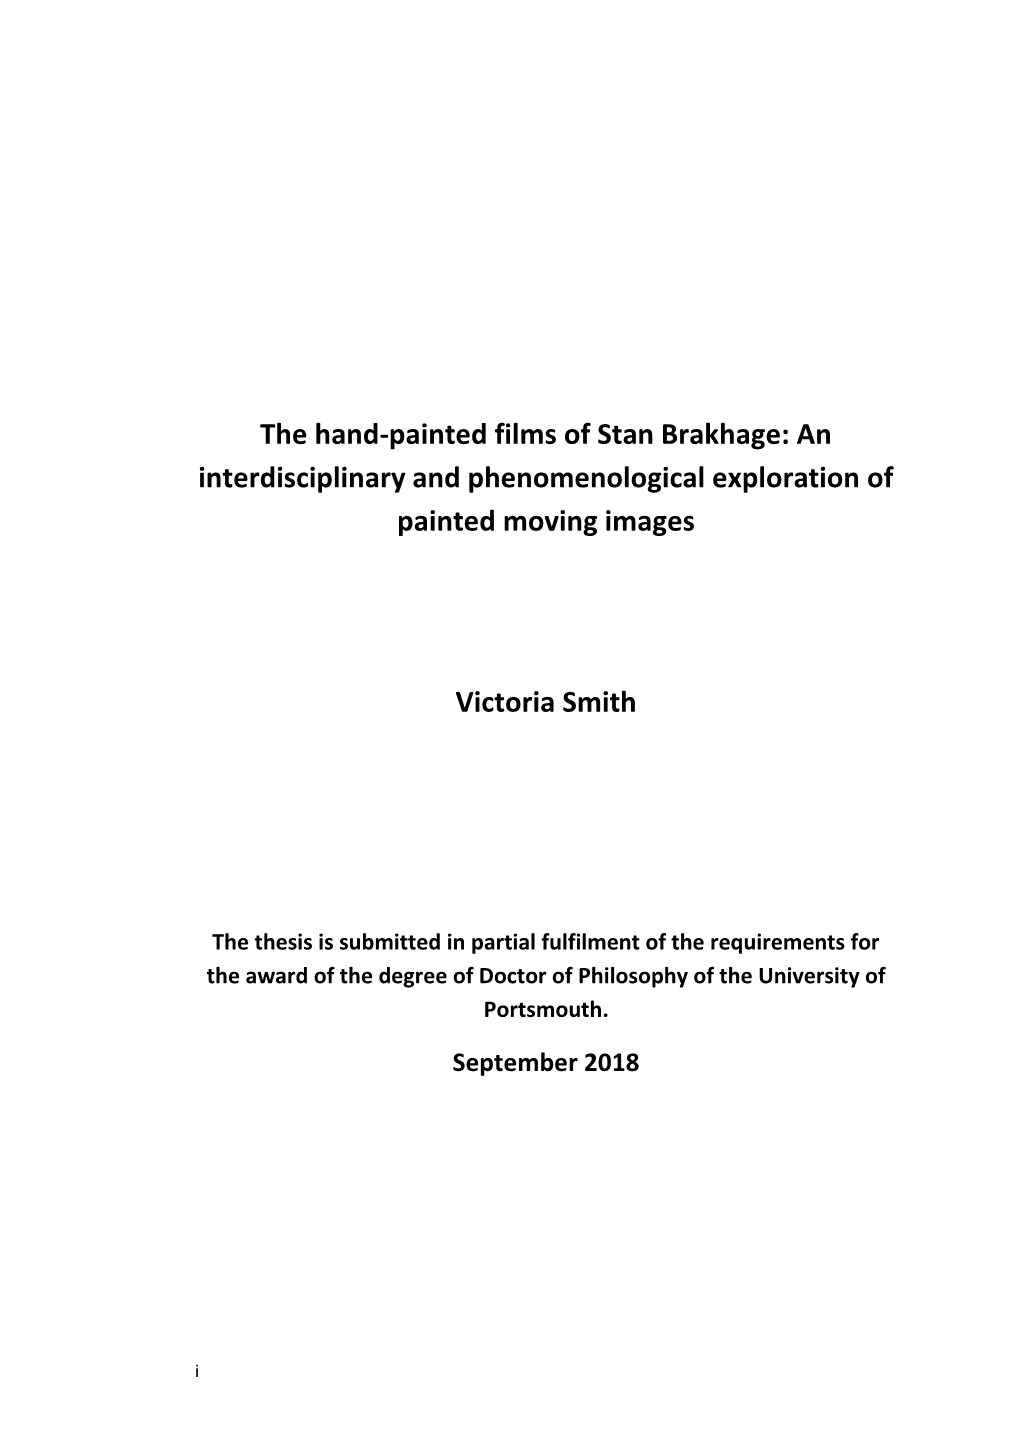 The Hand-Painted Films of Stan Brakhage: an Interdisciplinary and Phenomenological Exploration of Painted Moving Images